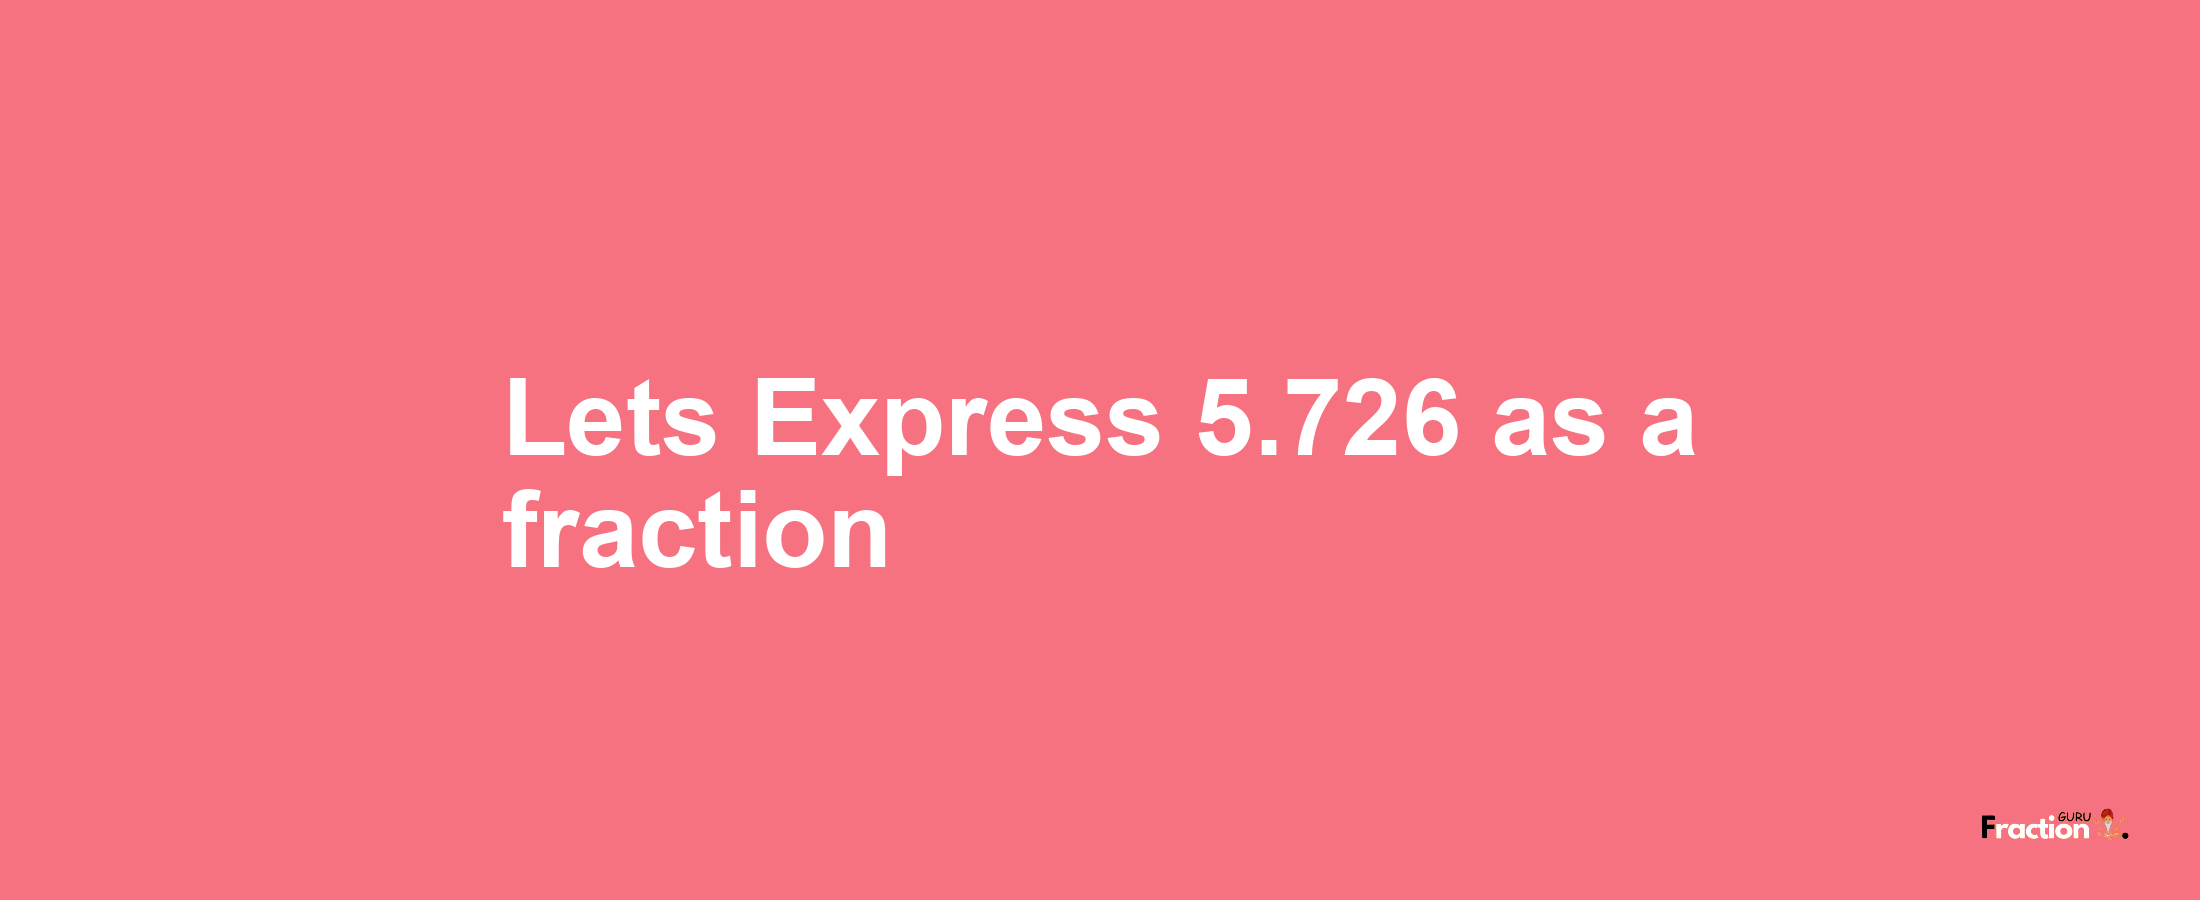 Lets Express 5.726 as afraction